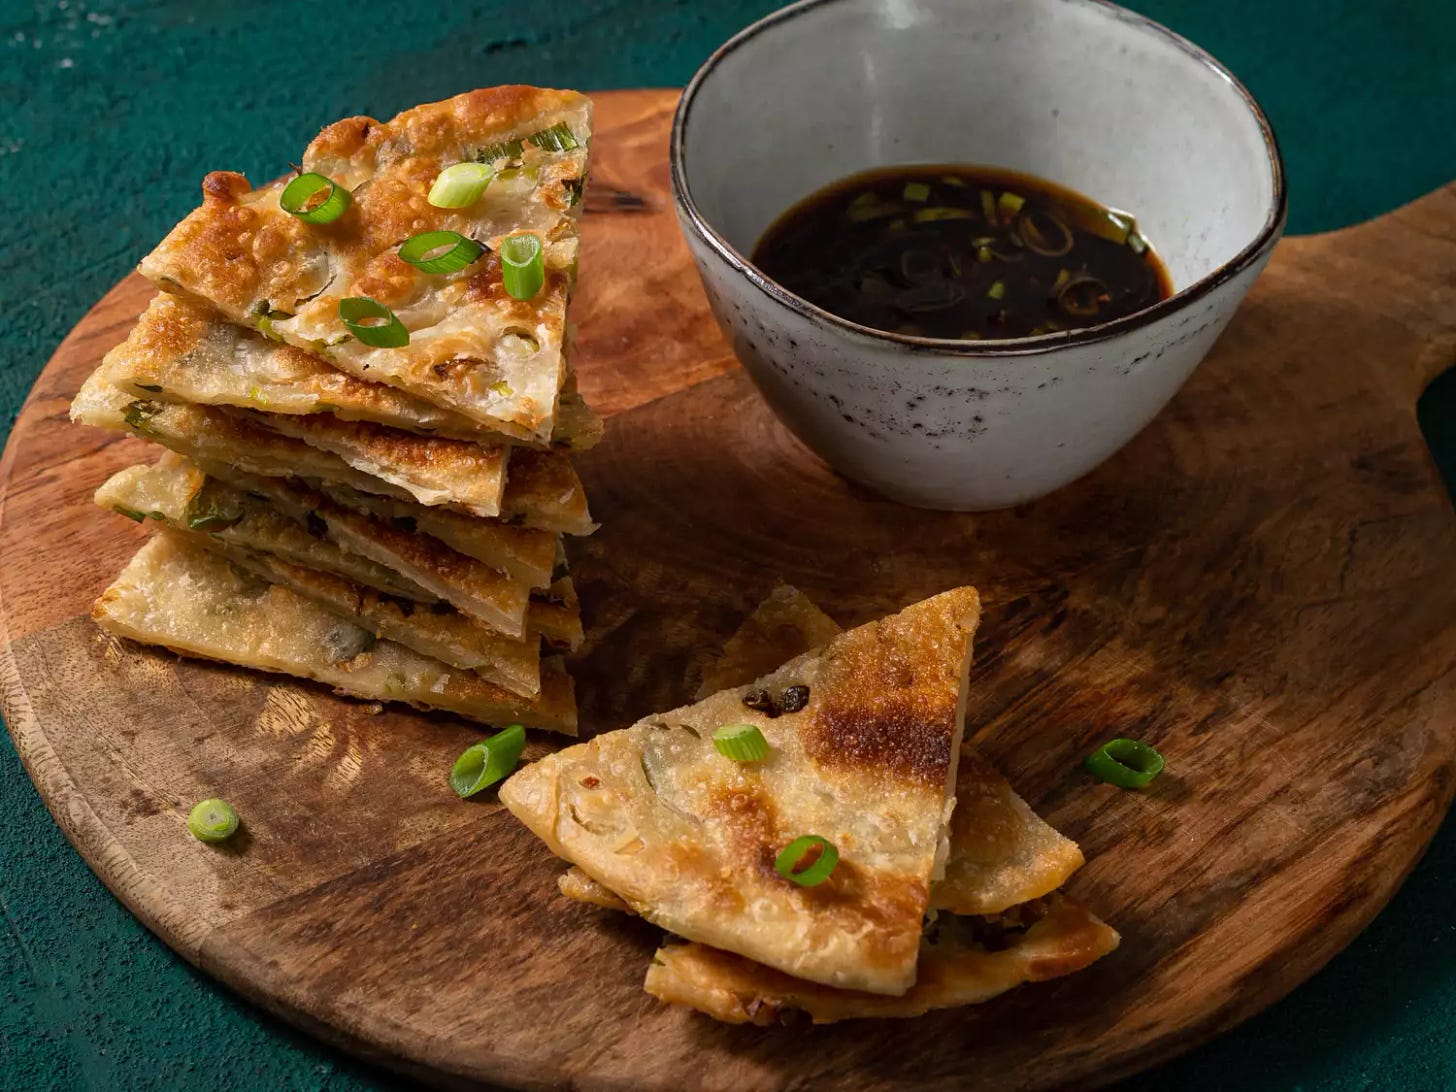 Scallion pancakes cut into slices, stacked on top of each other on a round wooden cutting board with a ceramic bowl of dipping sauce.